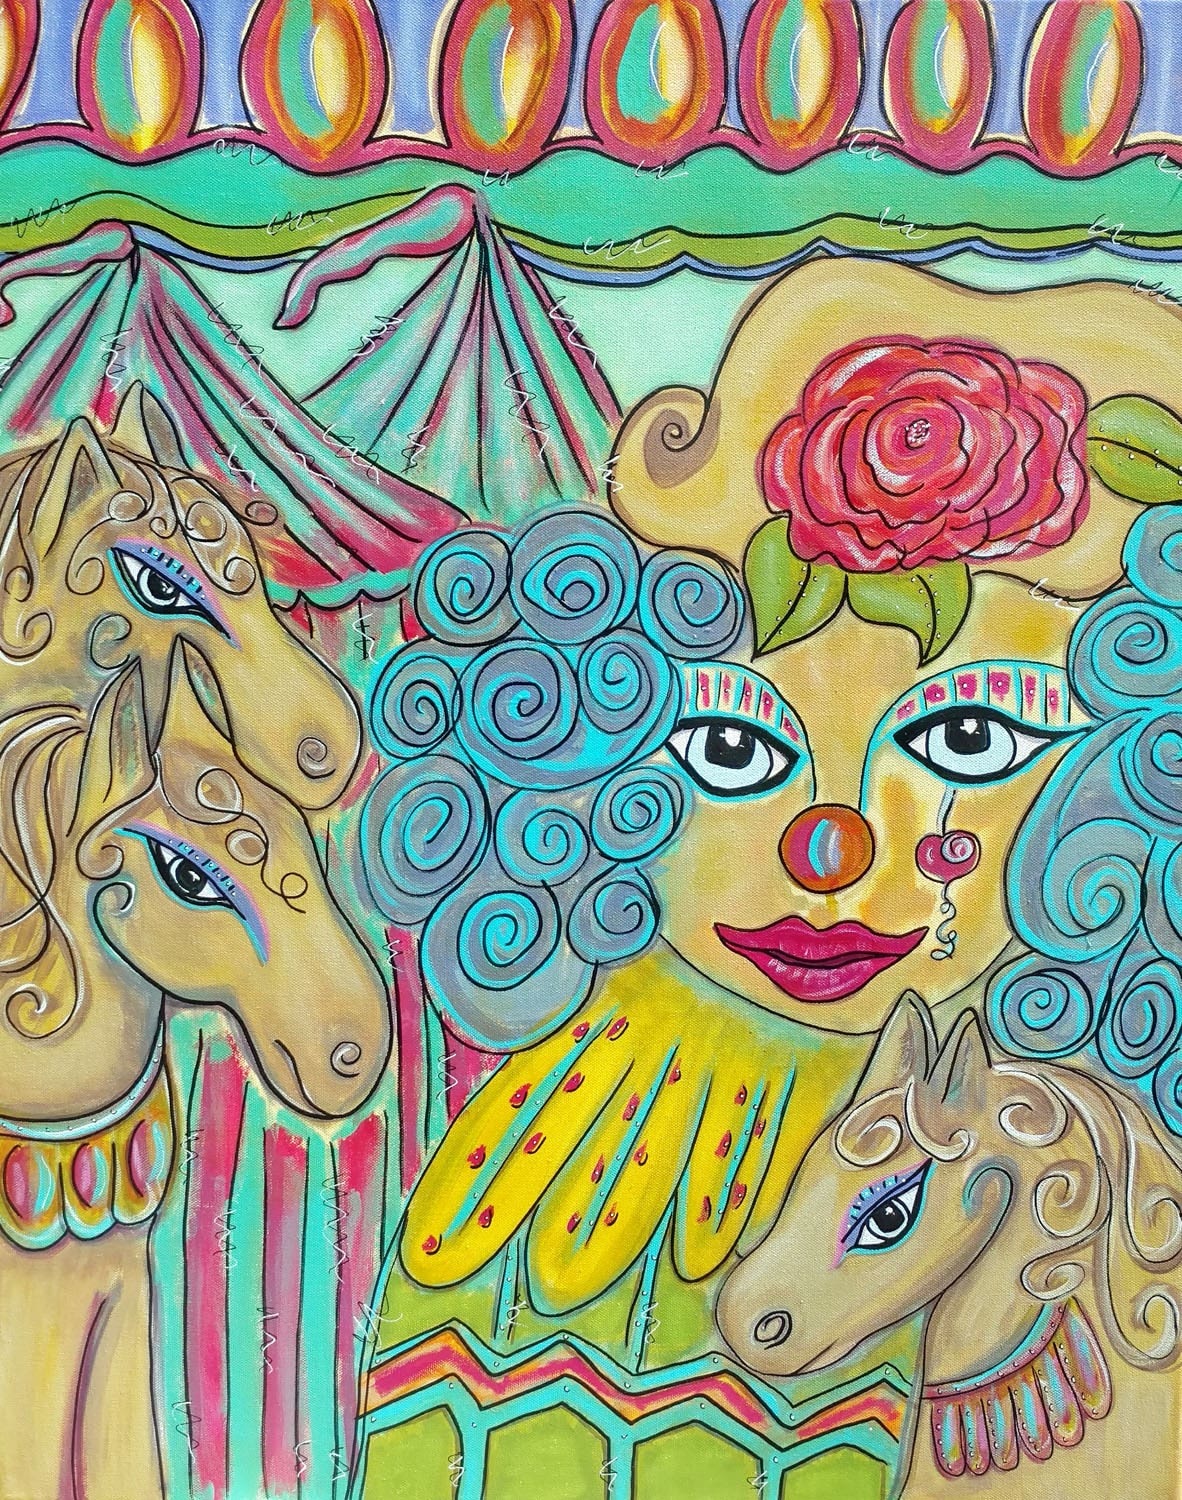 a blue haired clown with 3 horses in front of circus tents